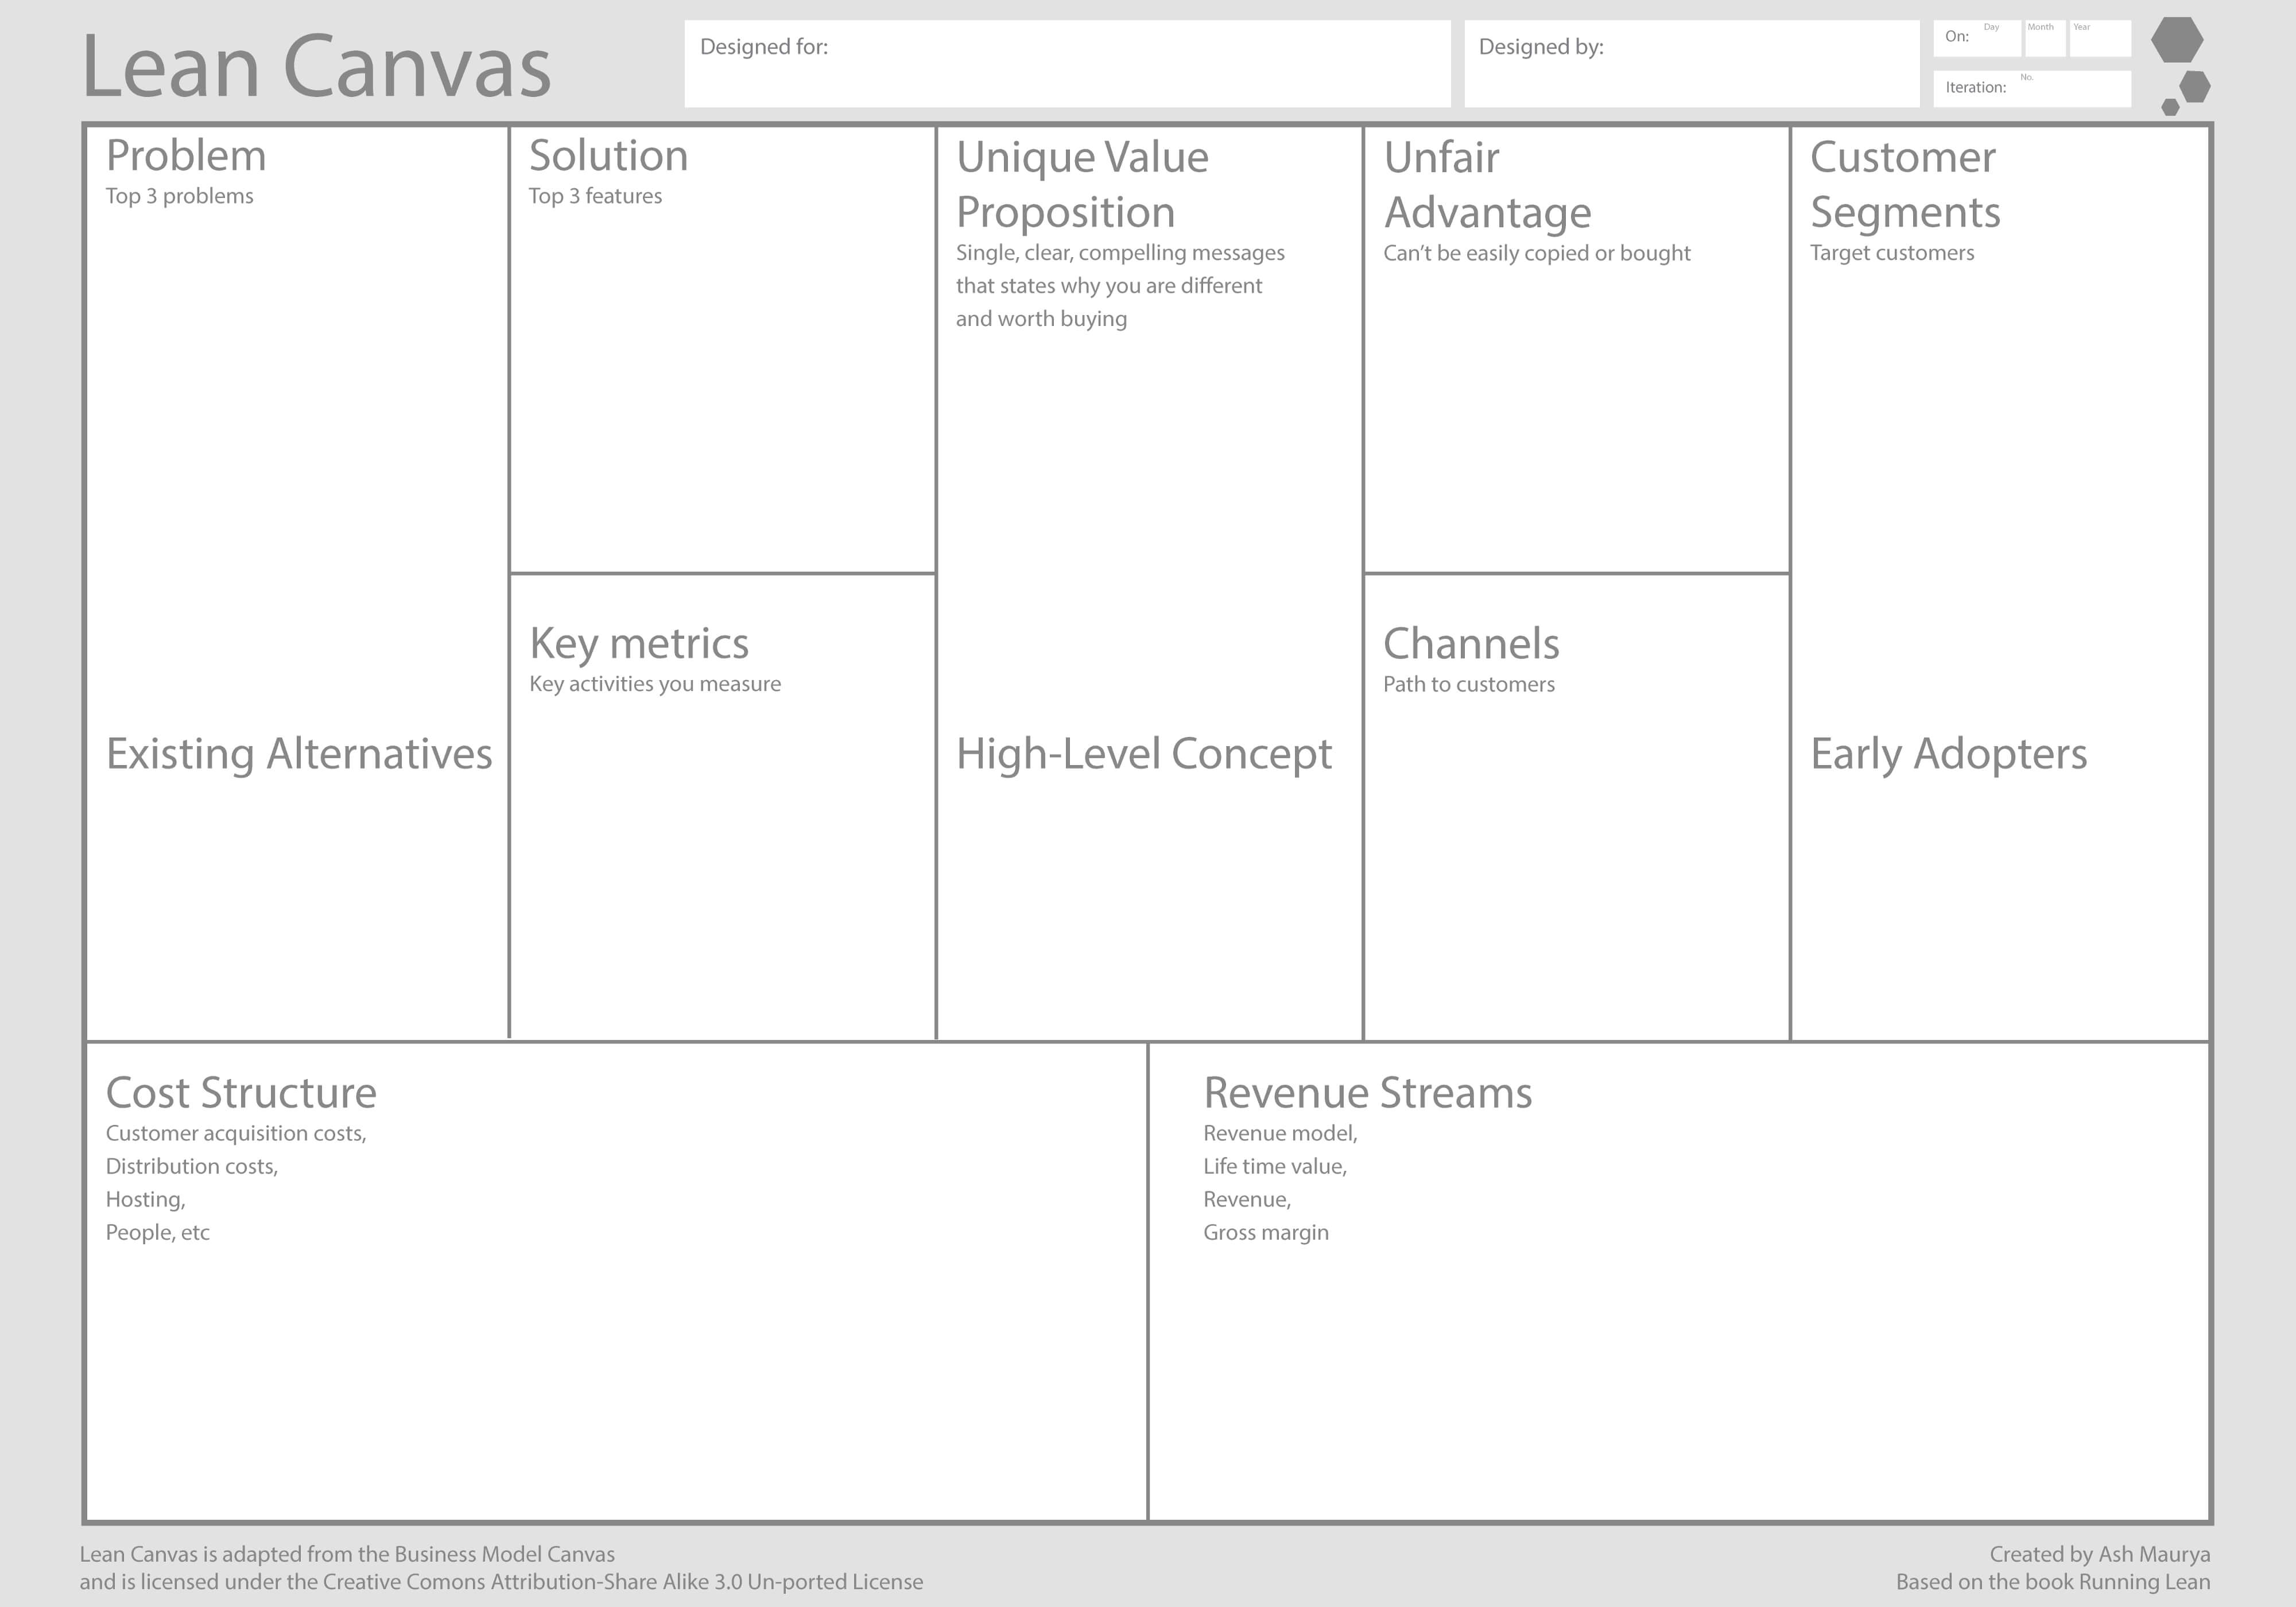 Using The Lean Canvas To Rethink A Business: My Session With Intended For Lean Canvas Word Template